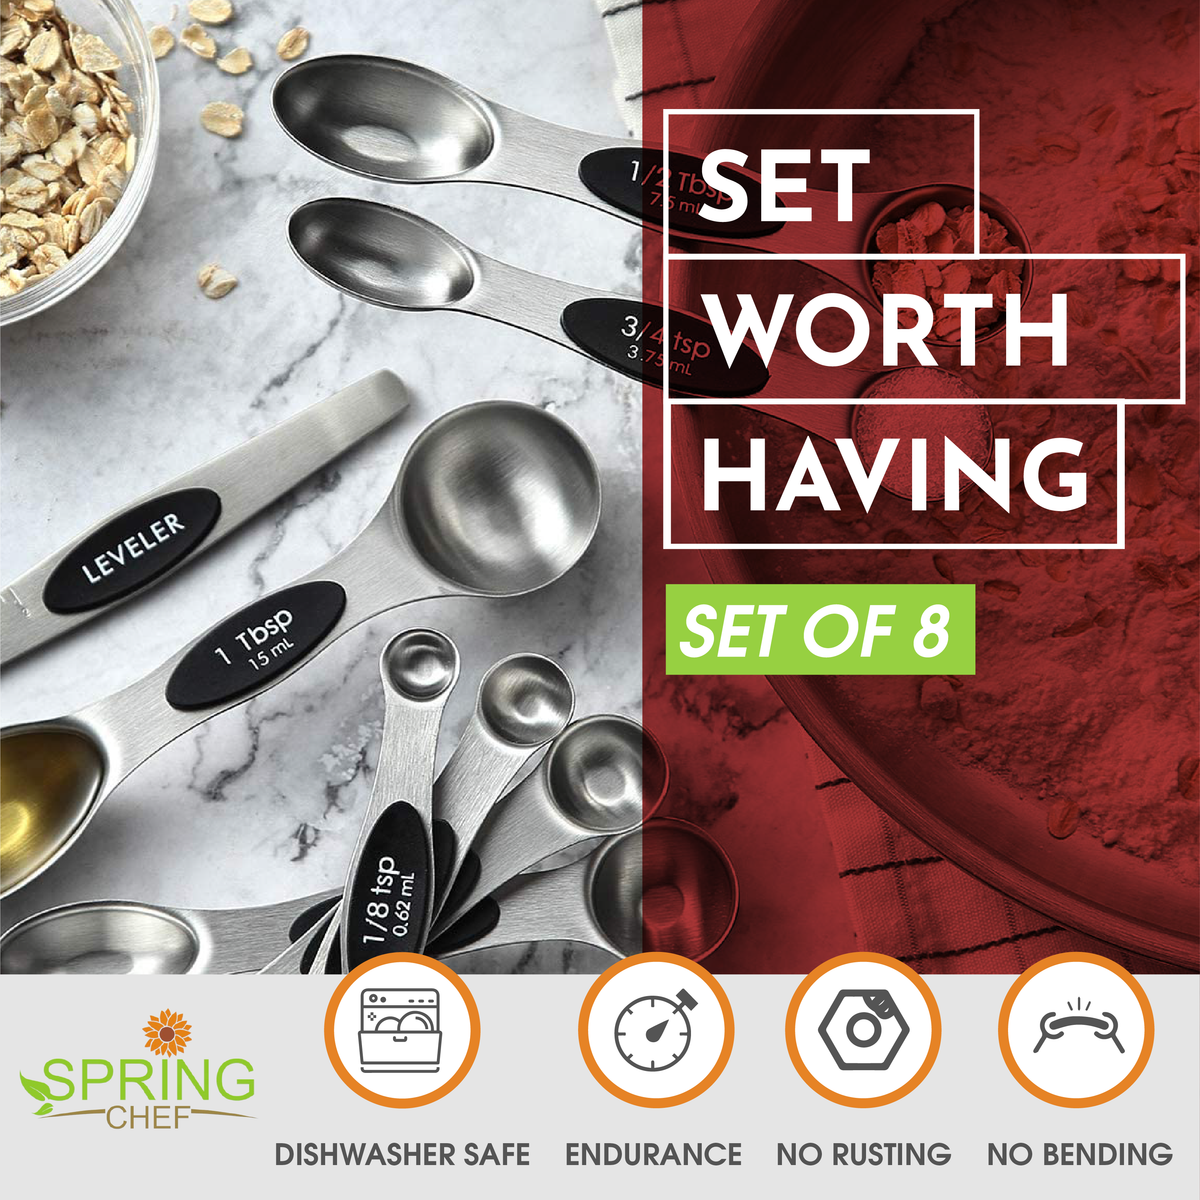 Magnetic Measuring Spoons Set, Dual Sided Stainless Steel Measuring Spoon Fits in Spice Jars Set of 8 for Dry and Liquid Ingredients Oil, Salt and Sau